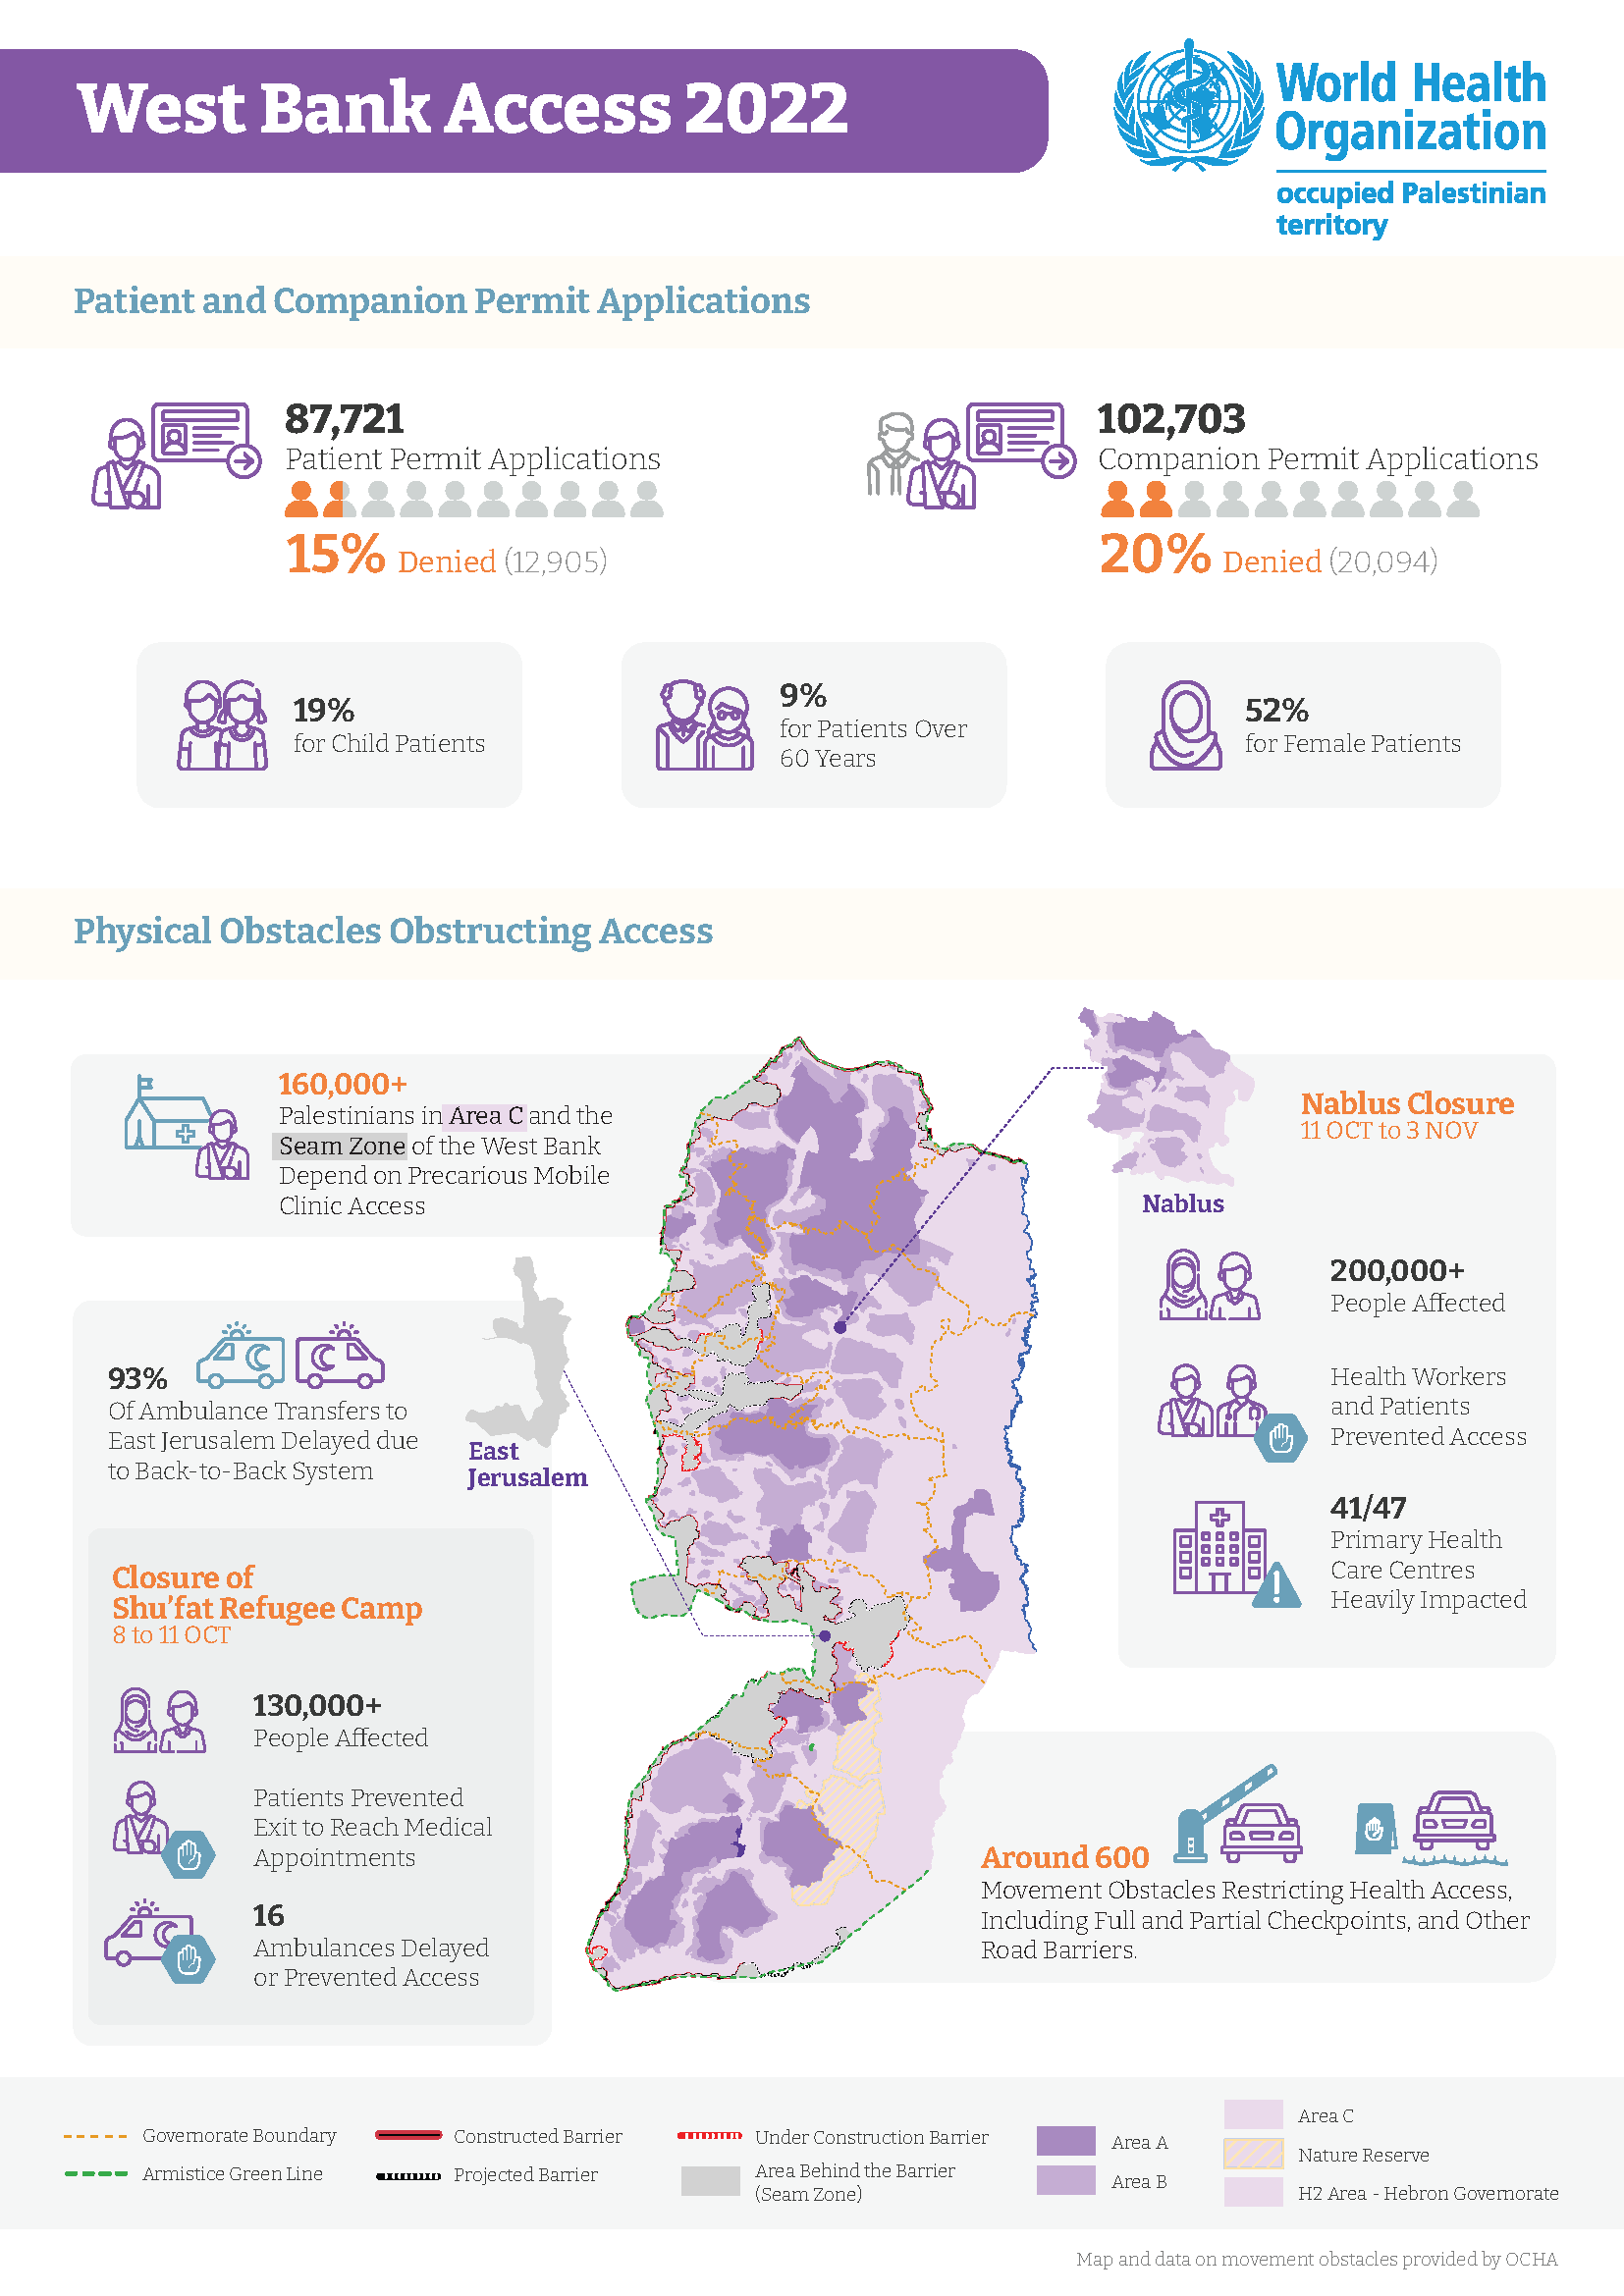 WestBank_Health_Access_2022_infographic_final